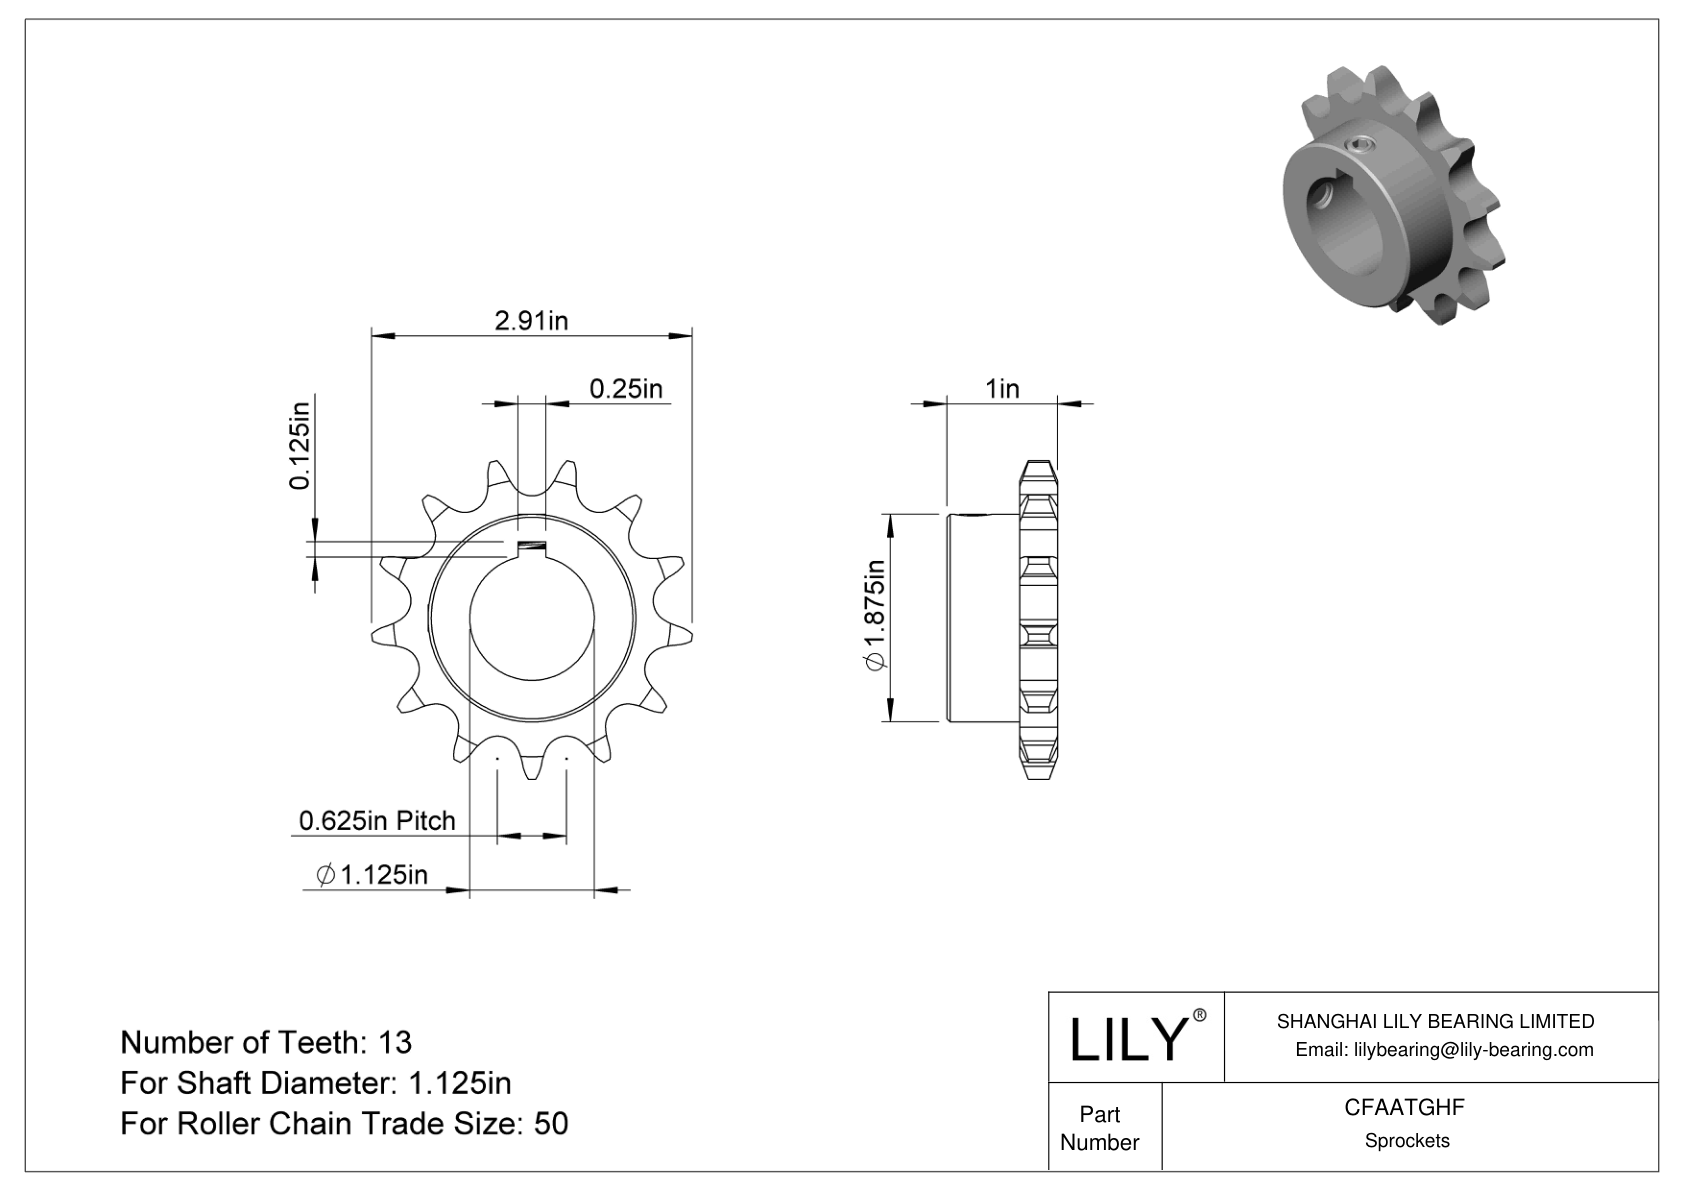 CFAATGHF Wear-Resistant Sprockets for ANSI Roller Chain cad drawing